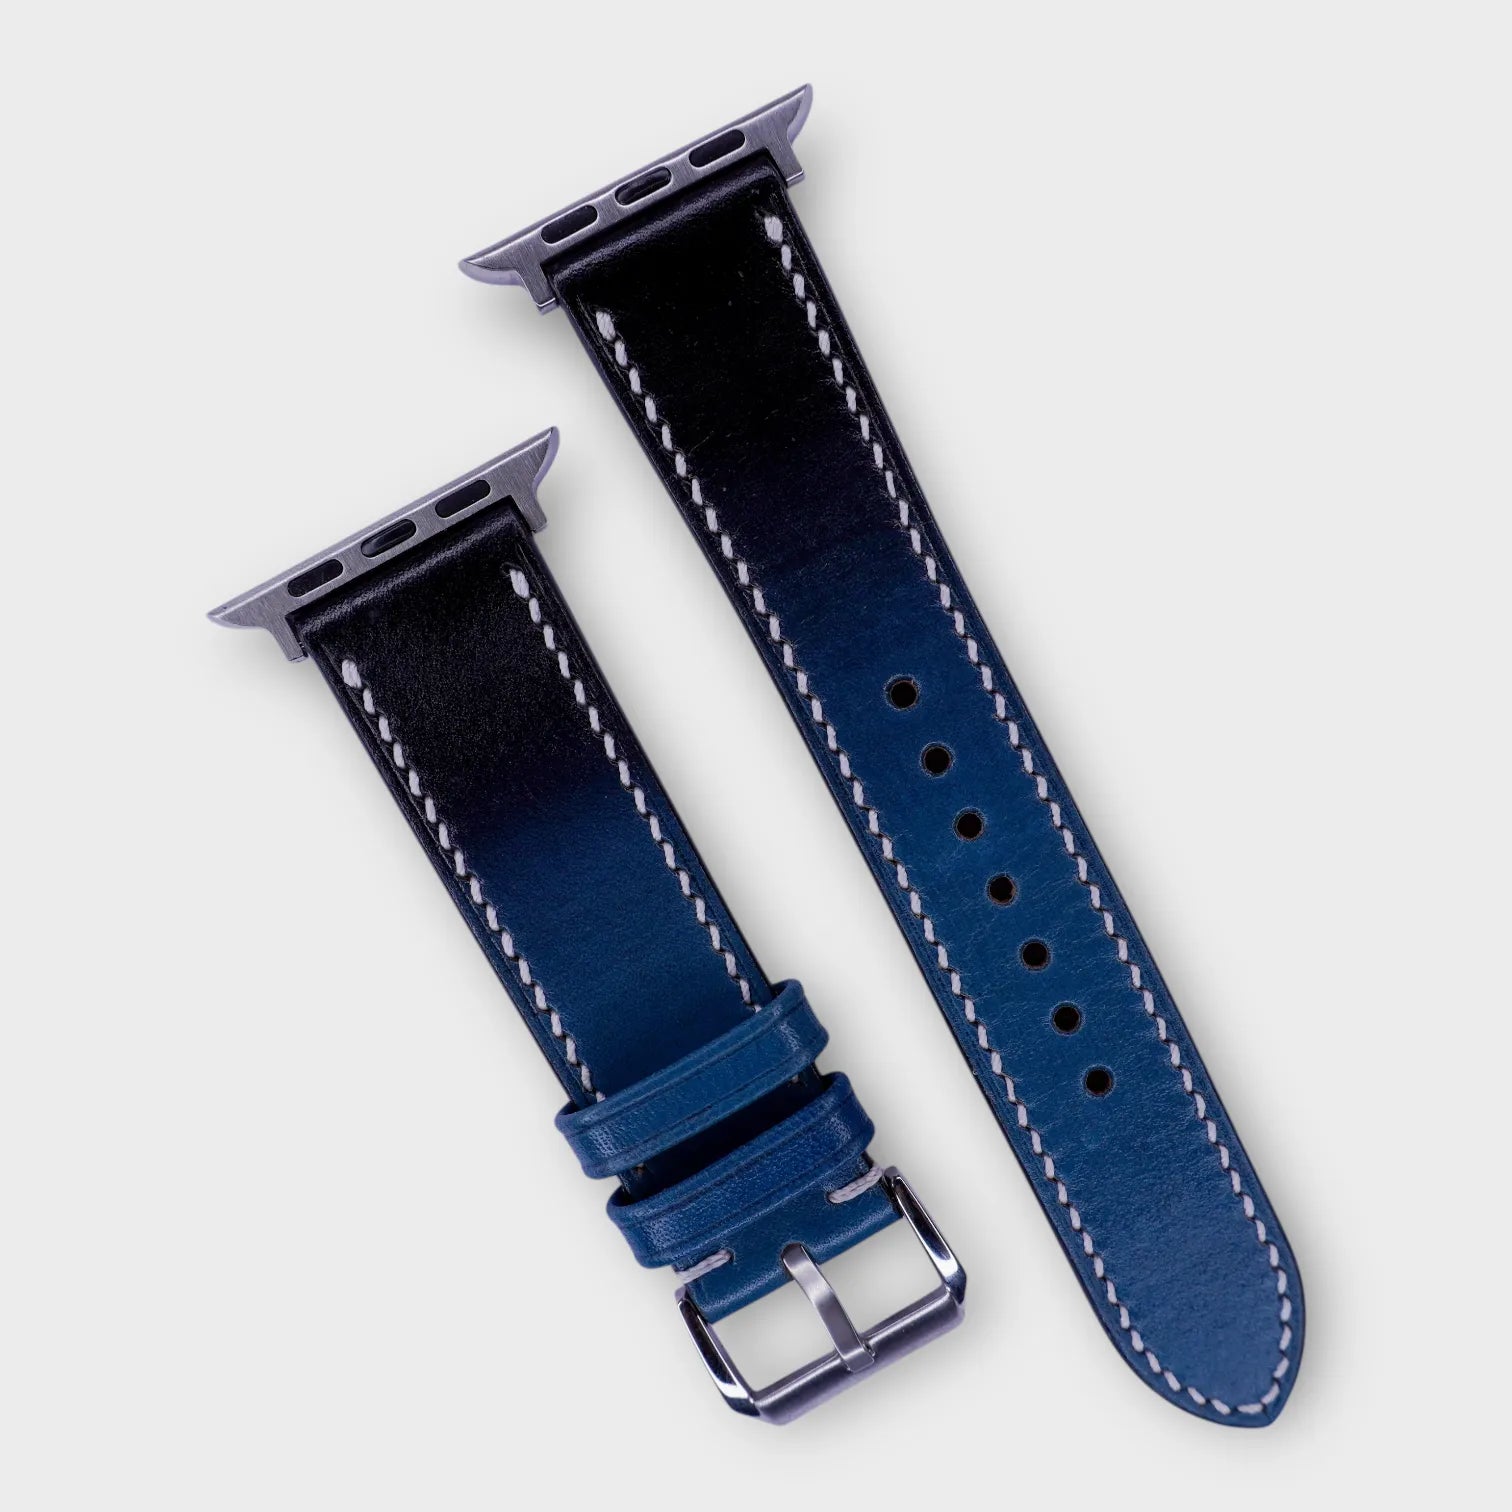 Vibrant leather watch bands, blue to black gradient Veg leather for Apple Watch.